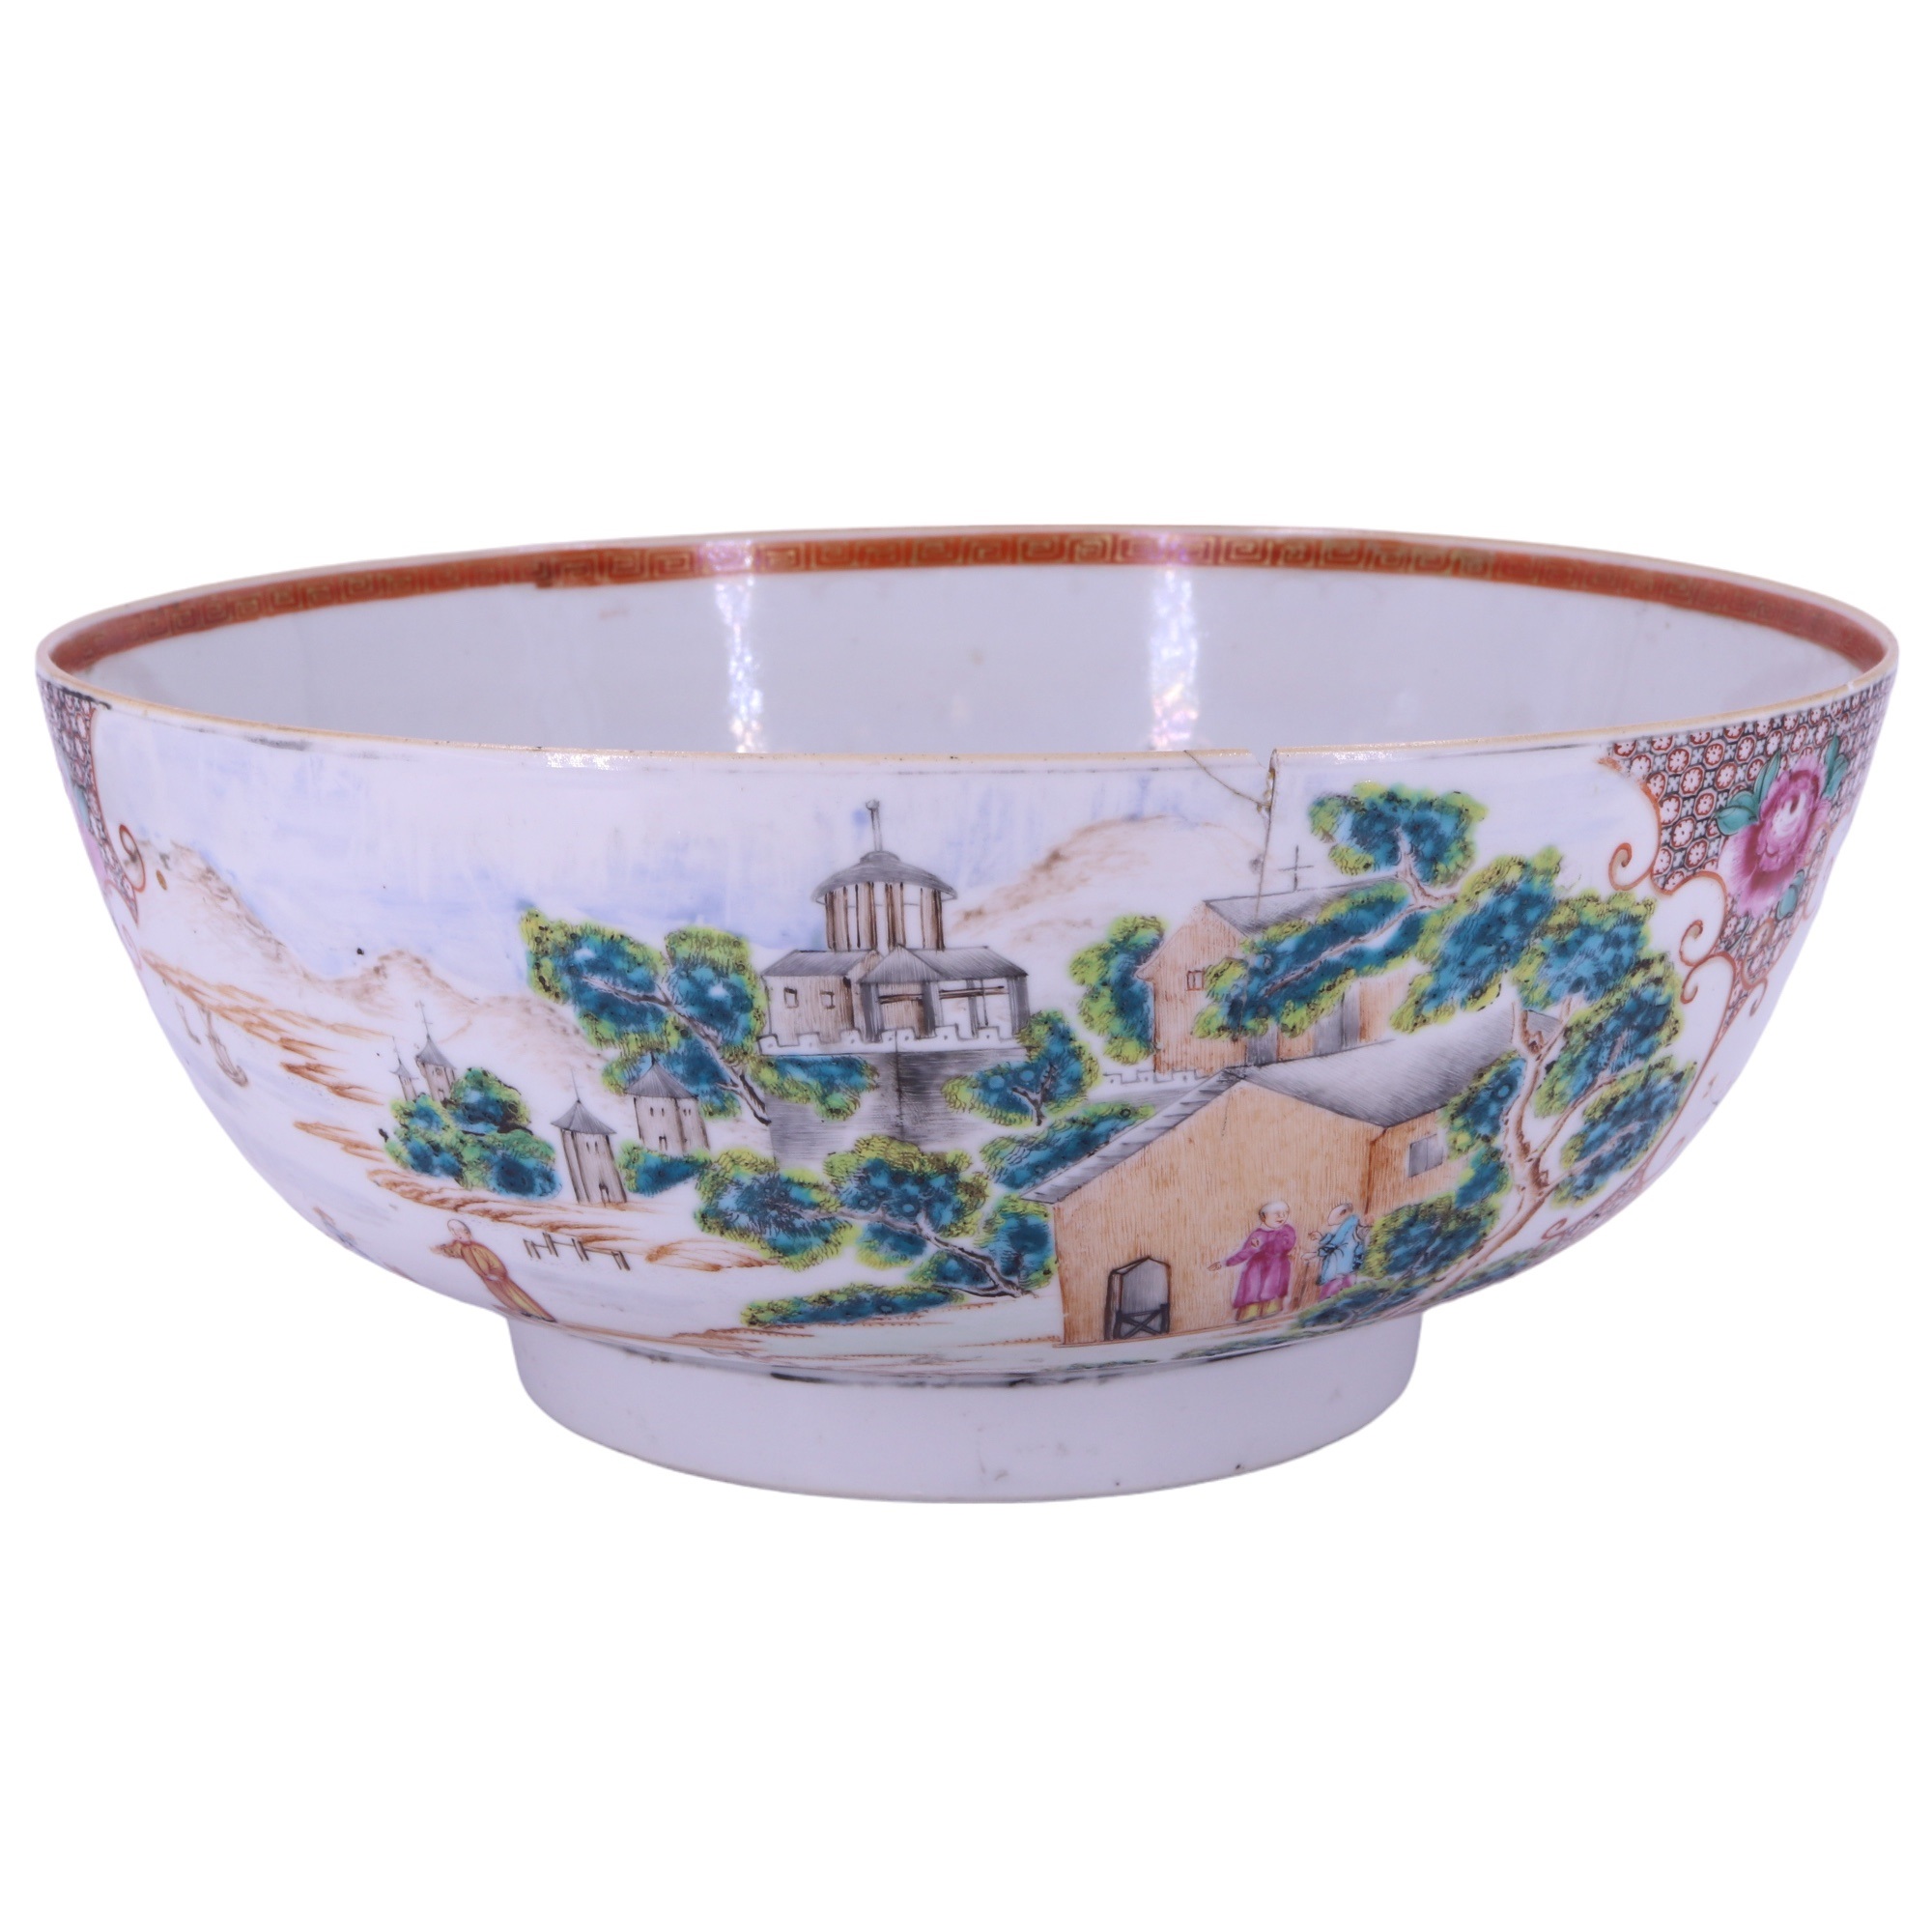 An 18th Century Chinese export Famille rose porcelain punch bowl, decorated in depiction of European